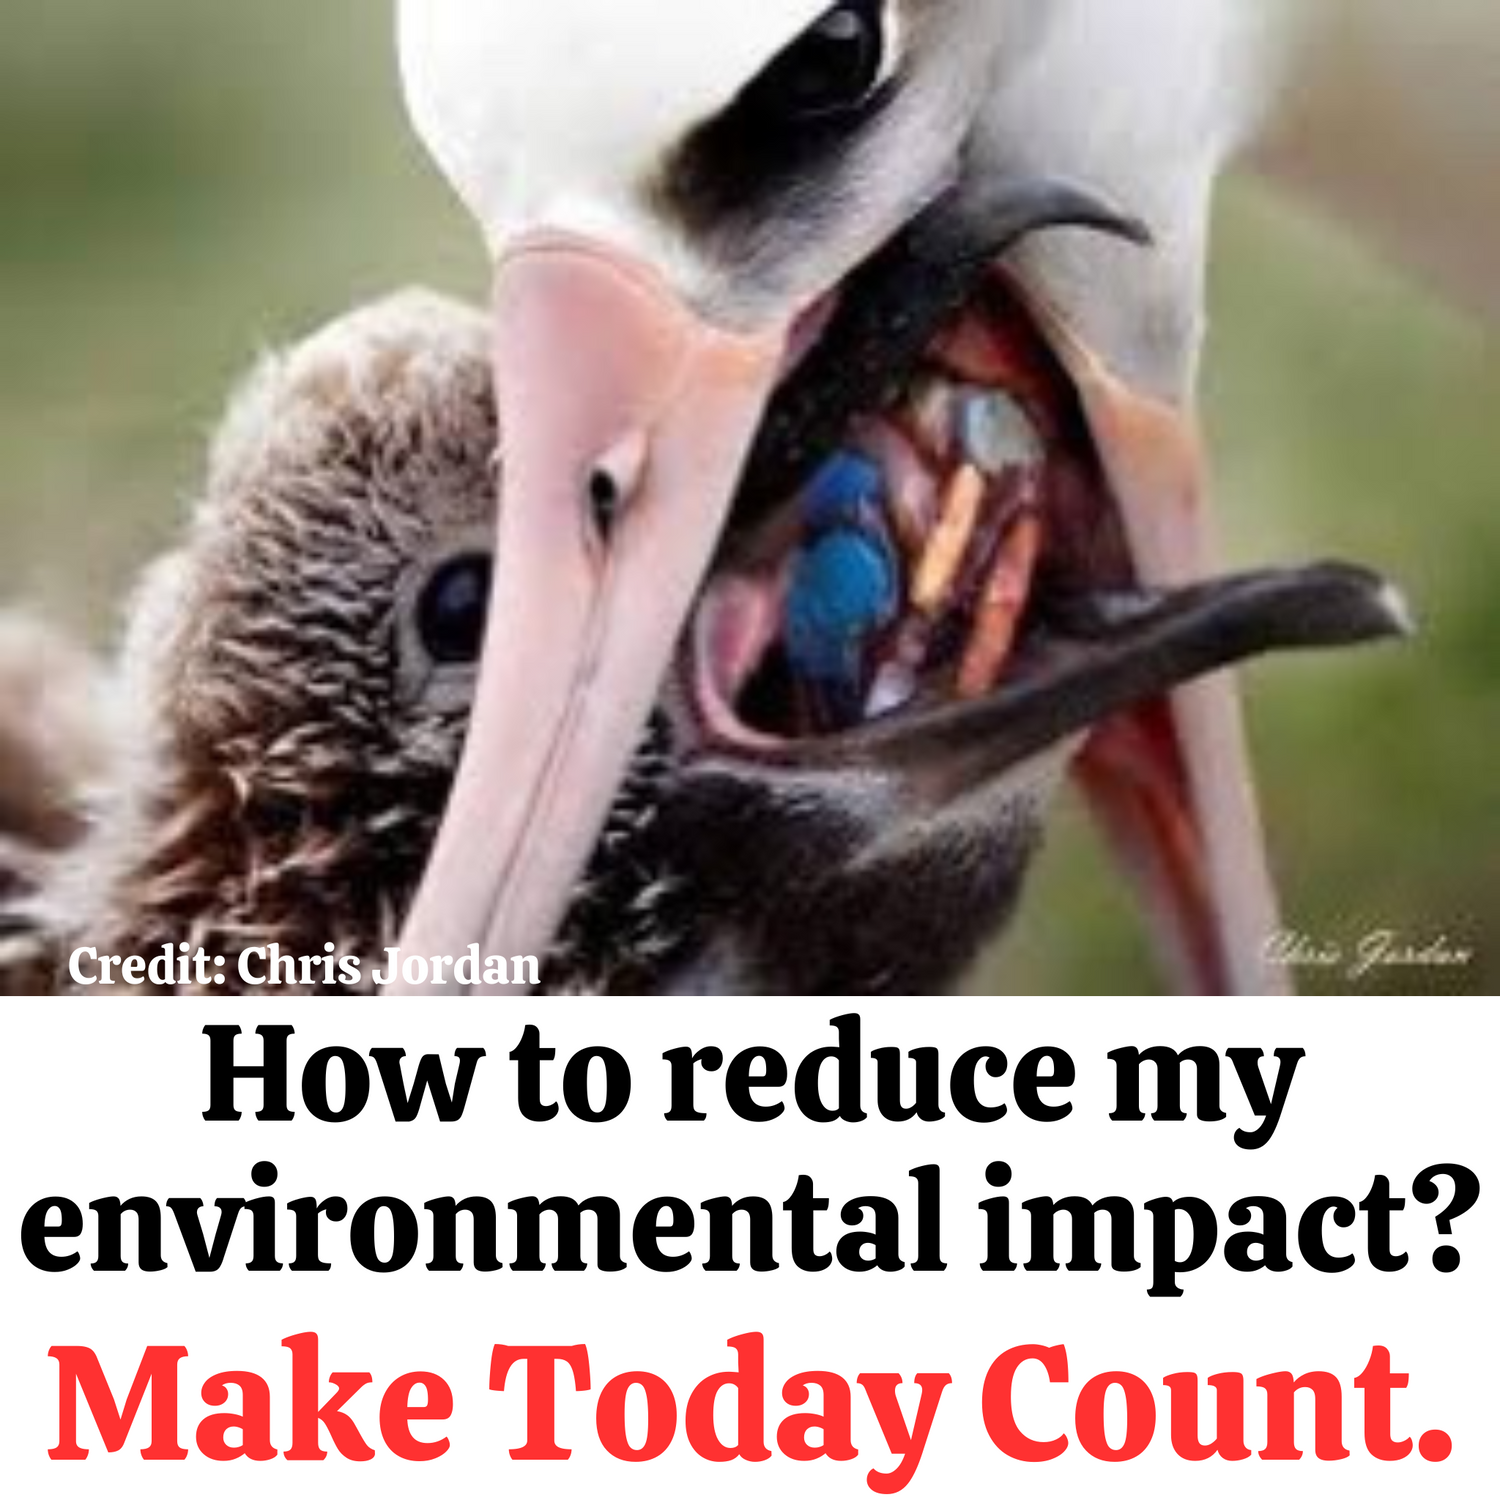 White albatross mama bird feeding her young offspring, this image captures the contents of the food being passed from adult to child bird is full of different colored pieces of plastic with no food, below image are the words “What is your environmental impact?” Written in black letters. Line below in red letters “Make Today Count”